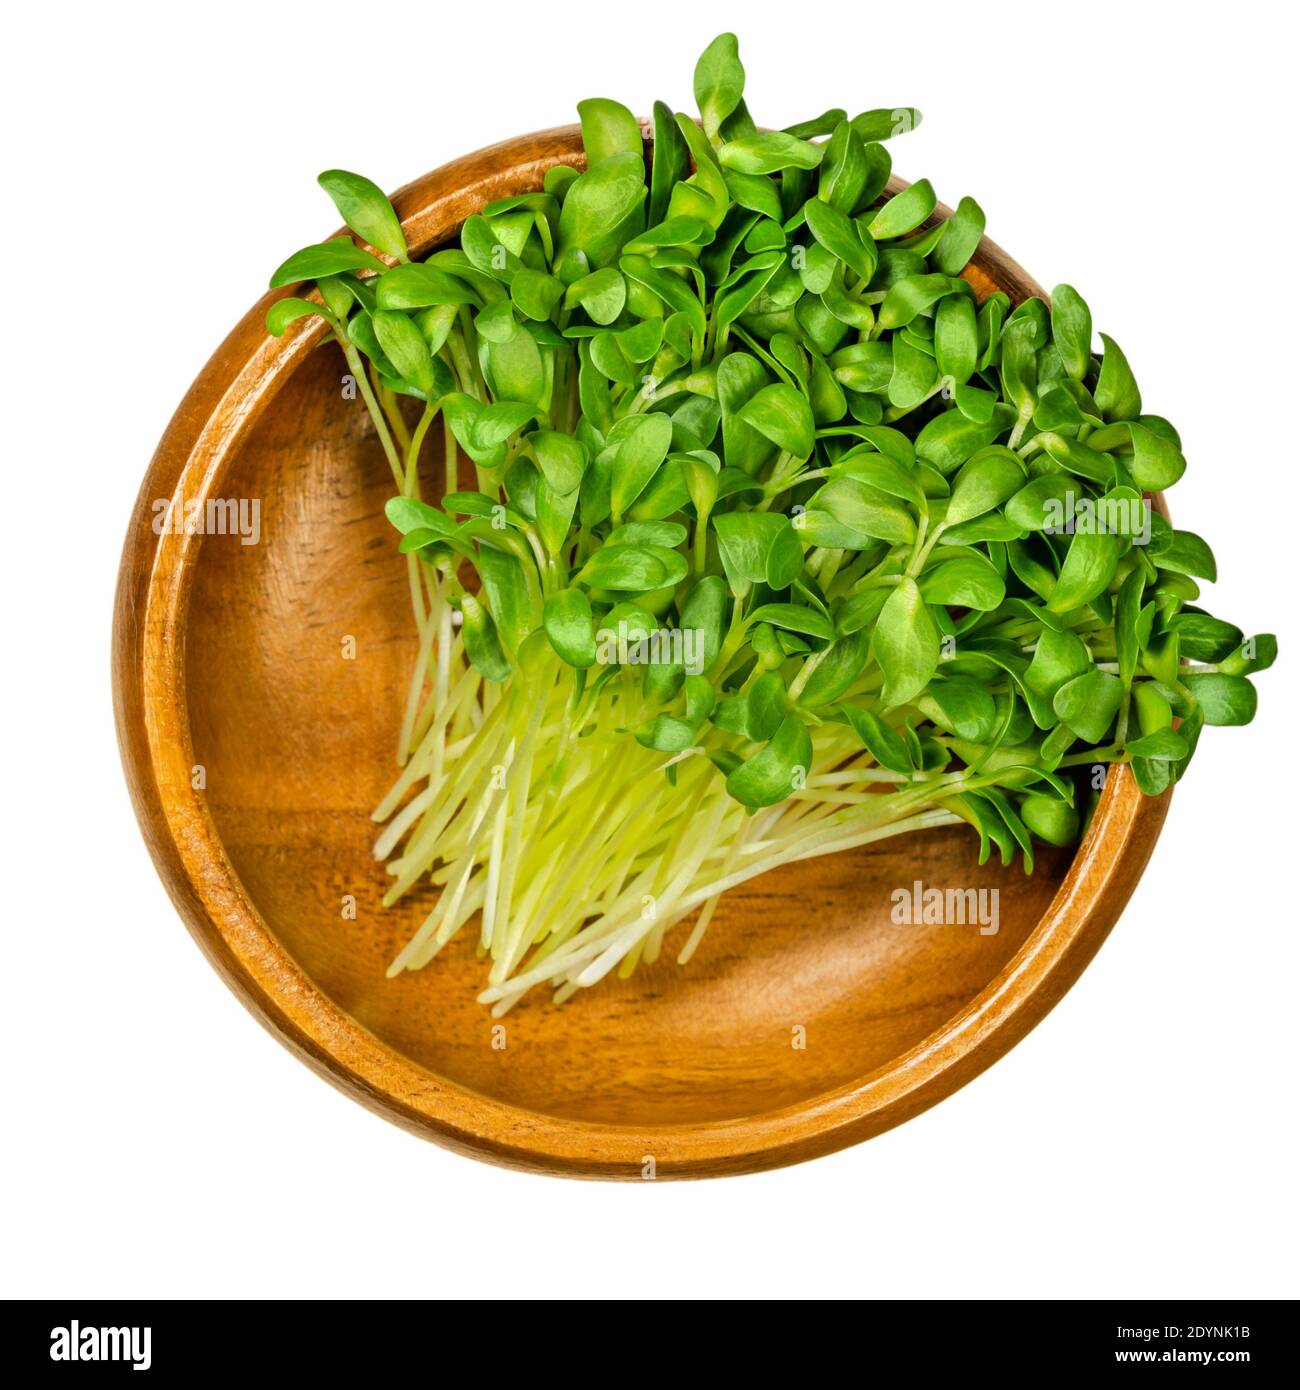 Fenugreek microgreens in a wooden bowl. Ready to eat green sprouts and shoots of Trigonella foenum-graecum. Used as herb and vegetable. Stock Photo